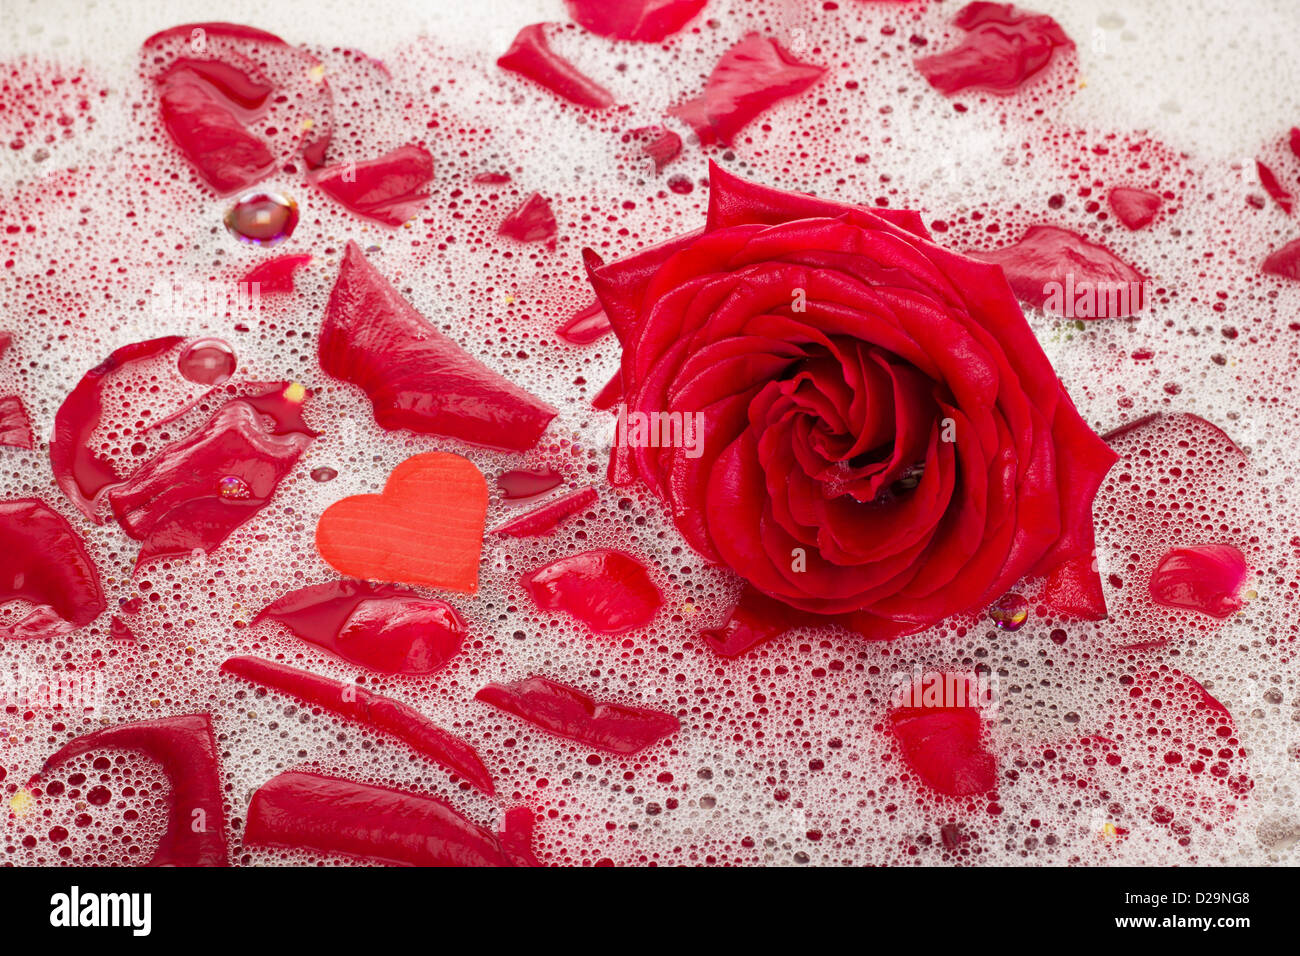 Bath water with rose petals Stock Photo